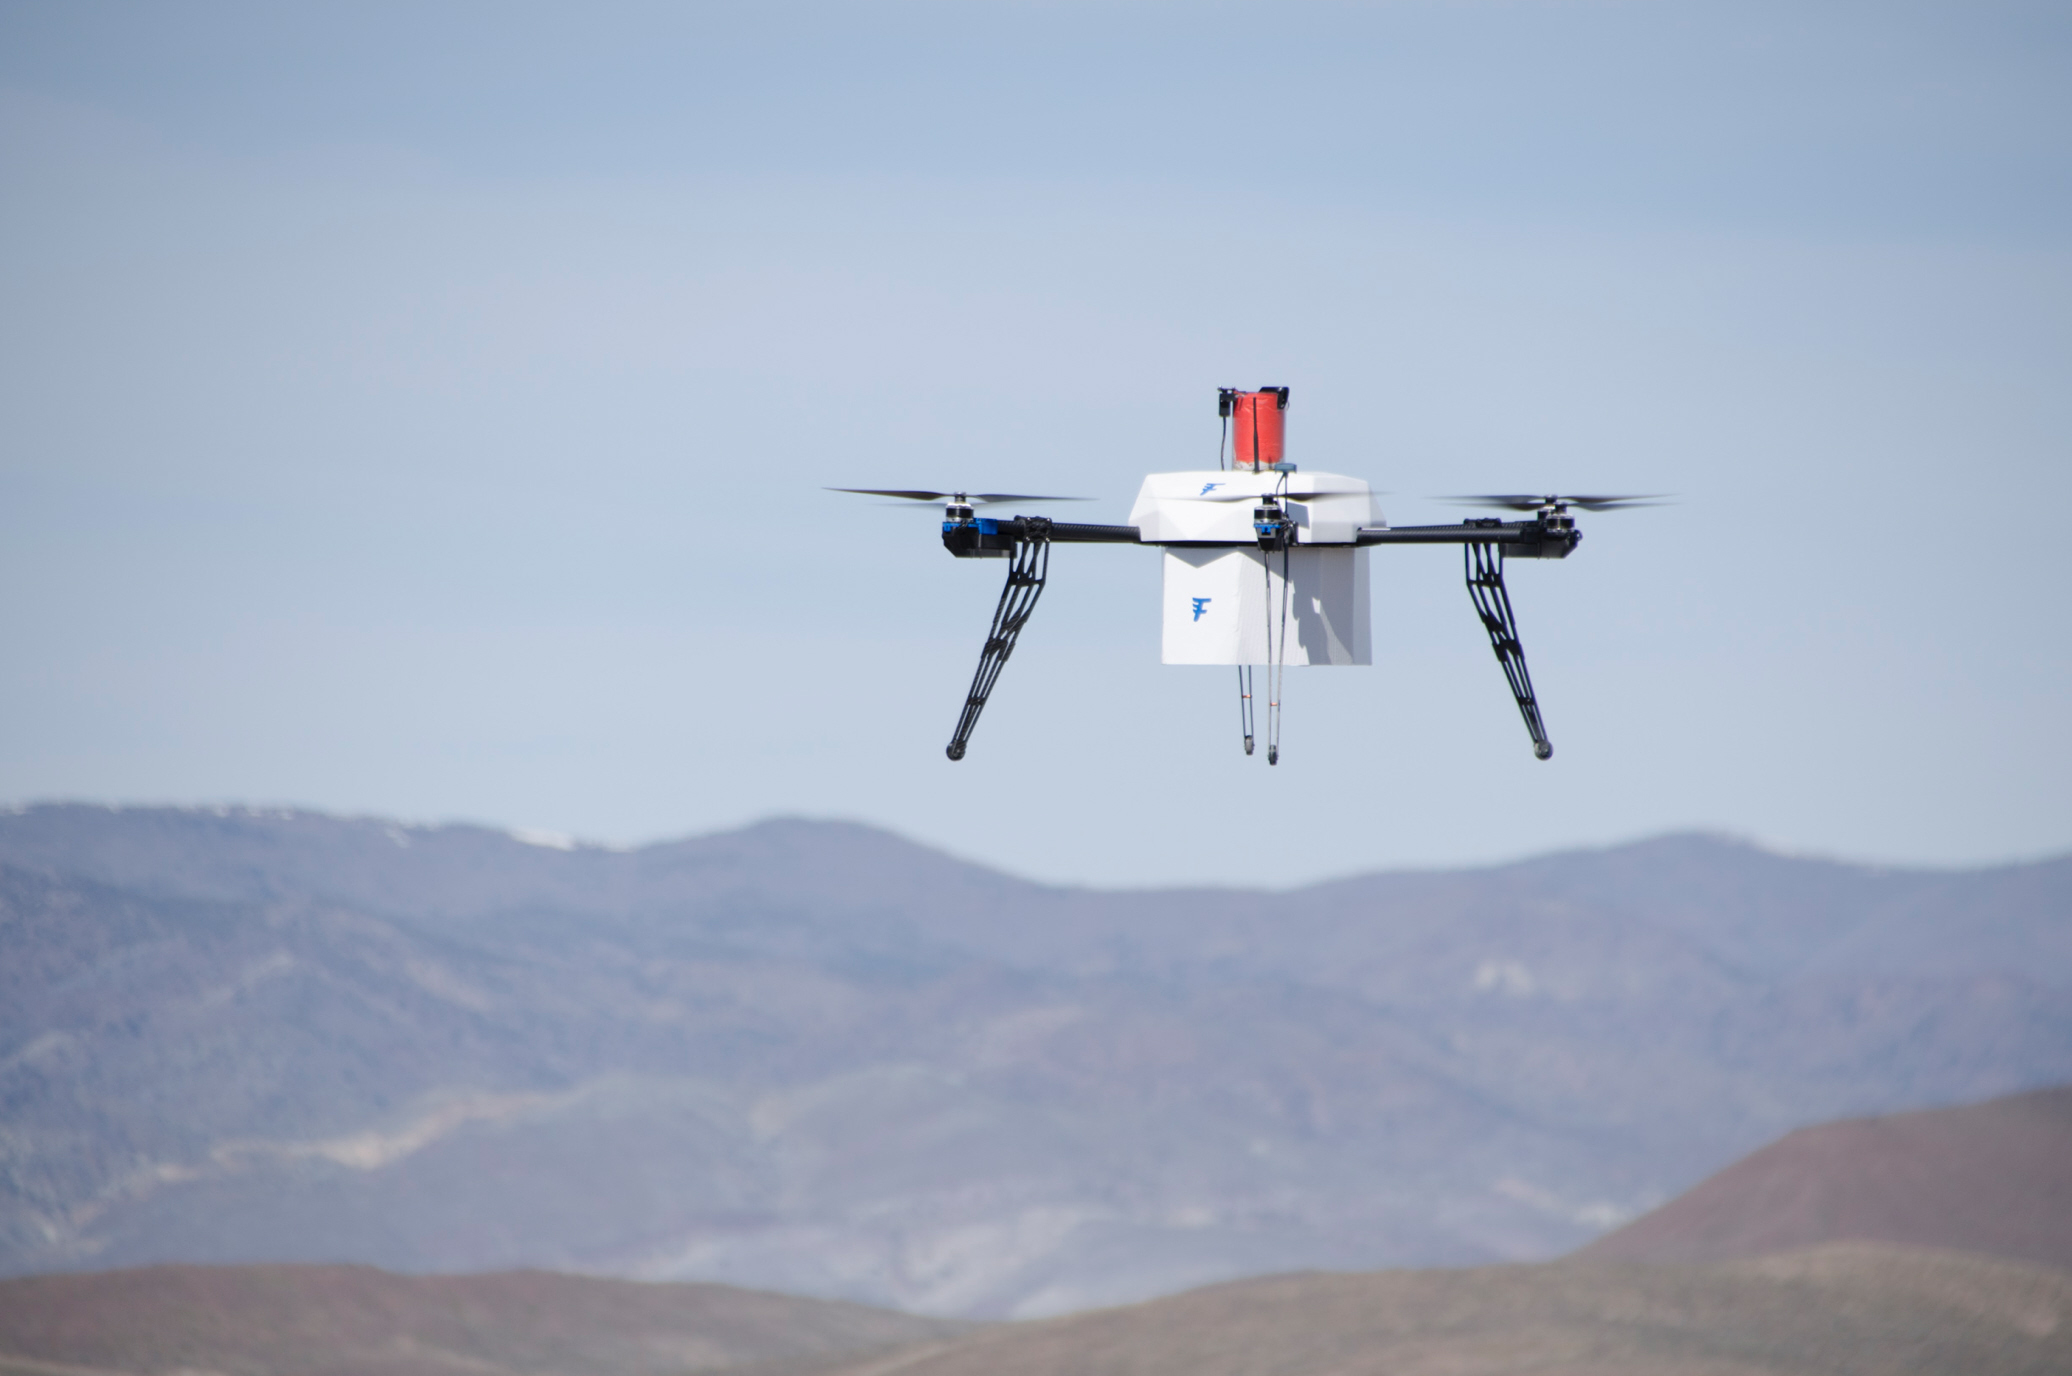 Google To Test Delivery Drones in the U.S.